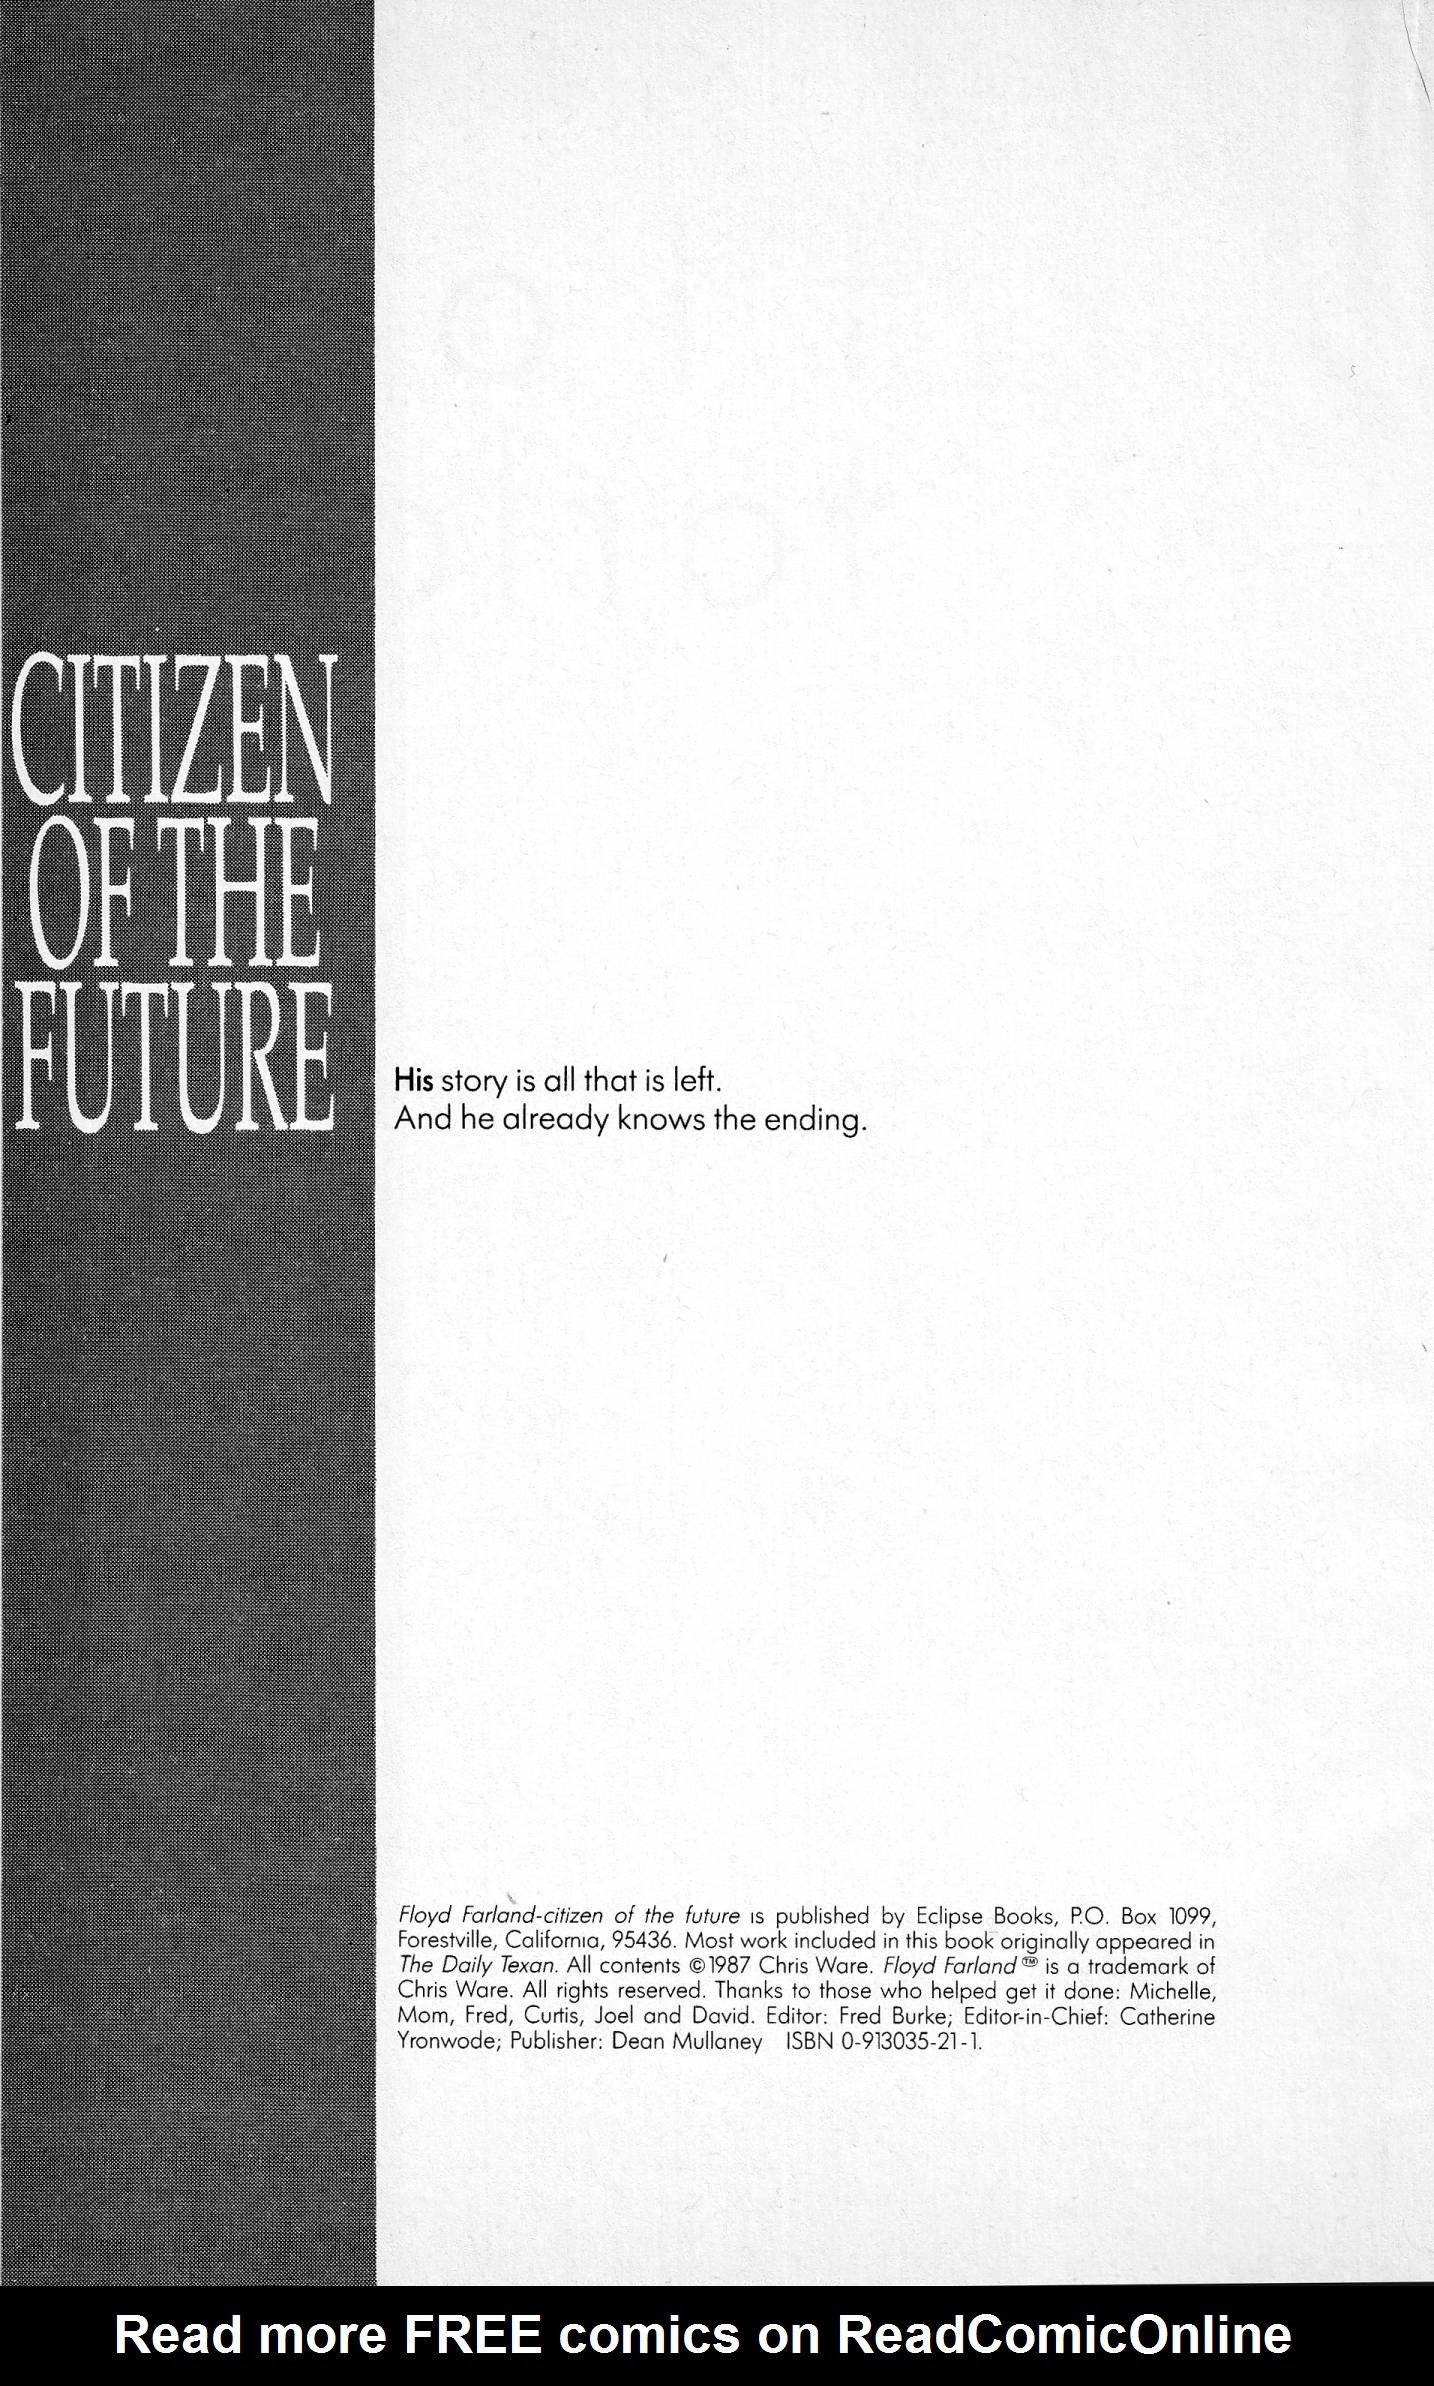 Read online Floyd Farland: Citizen of the Future comic -  Issue # Full - 4